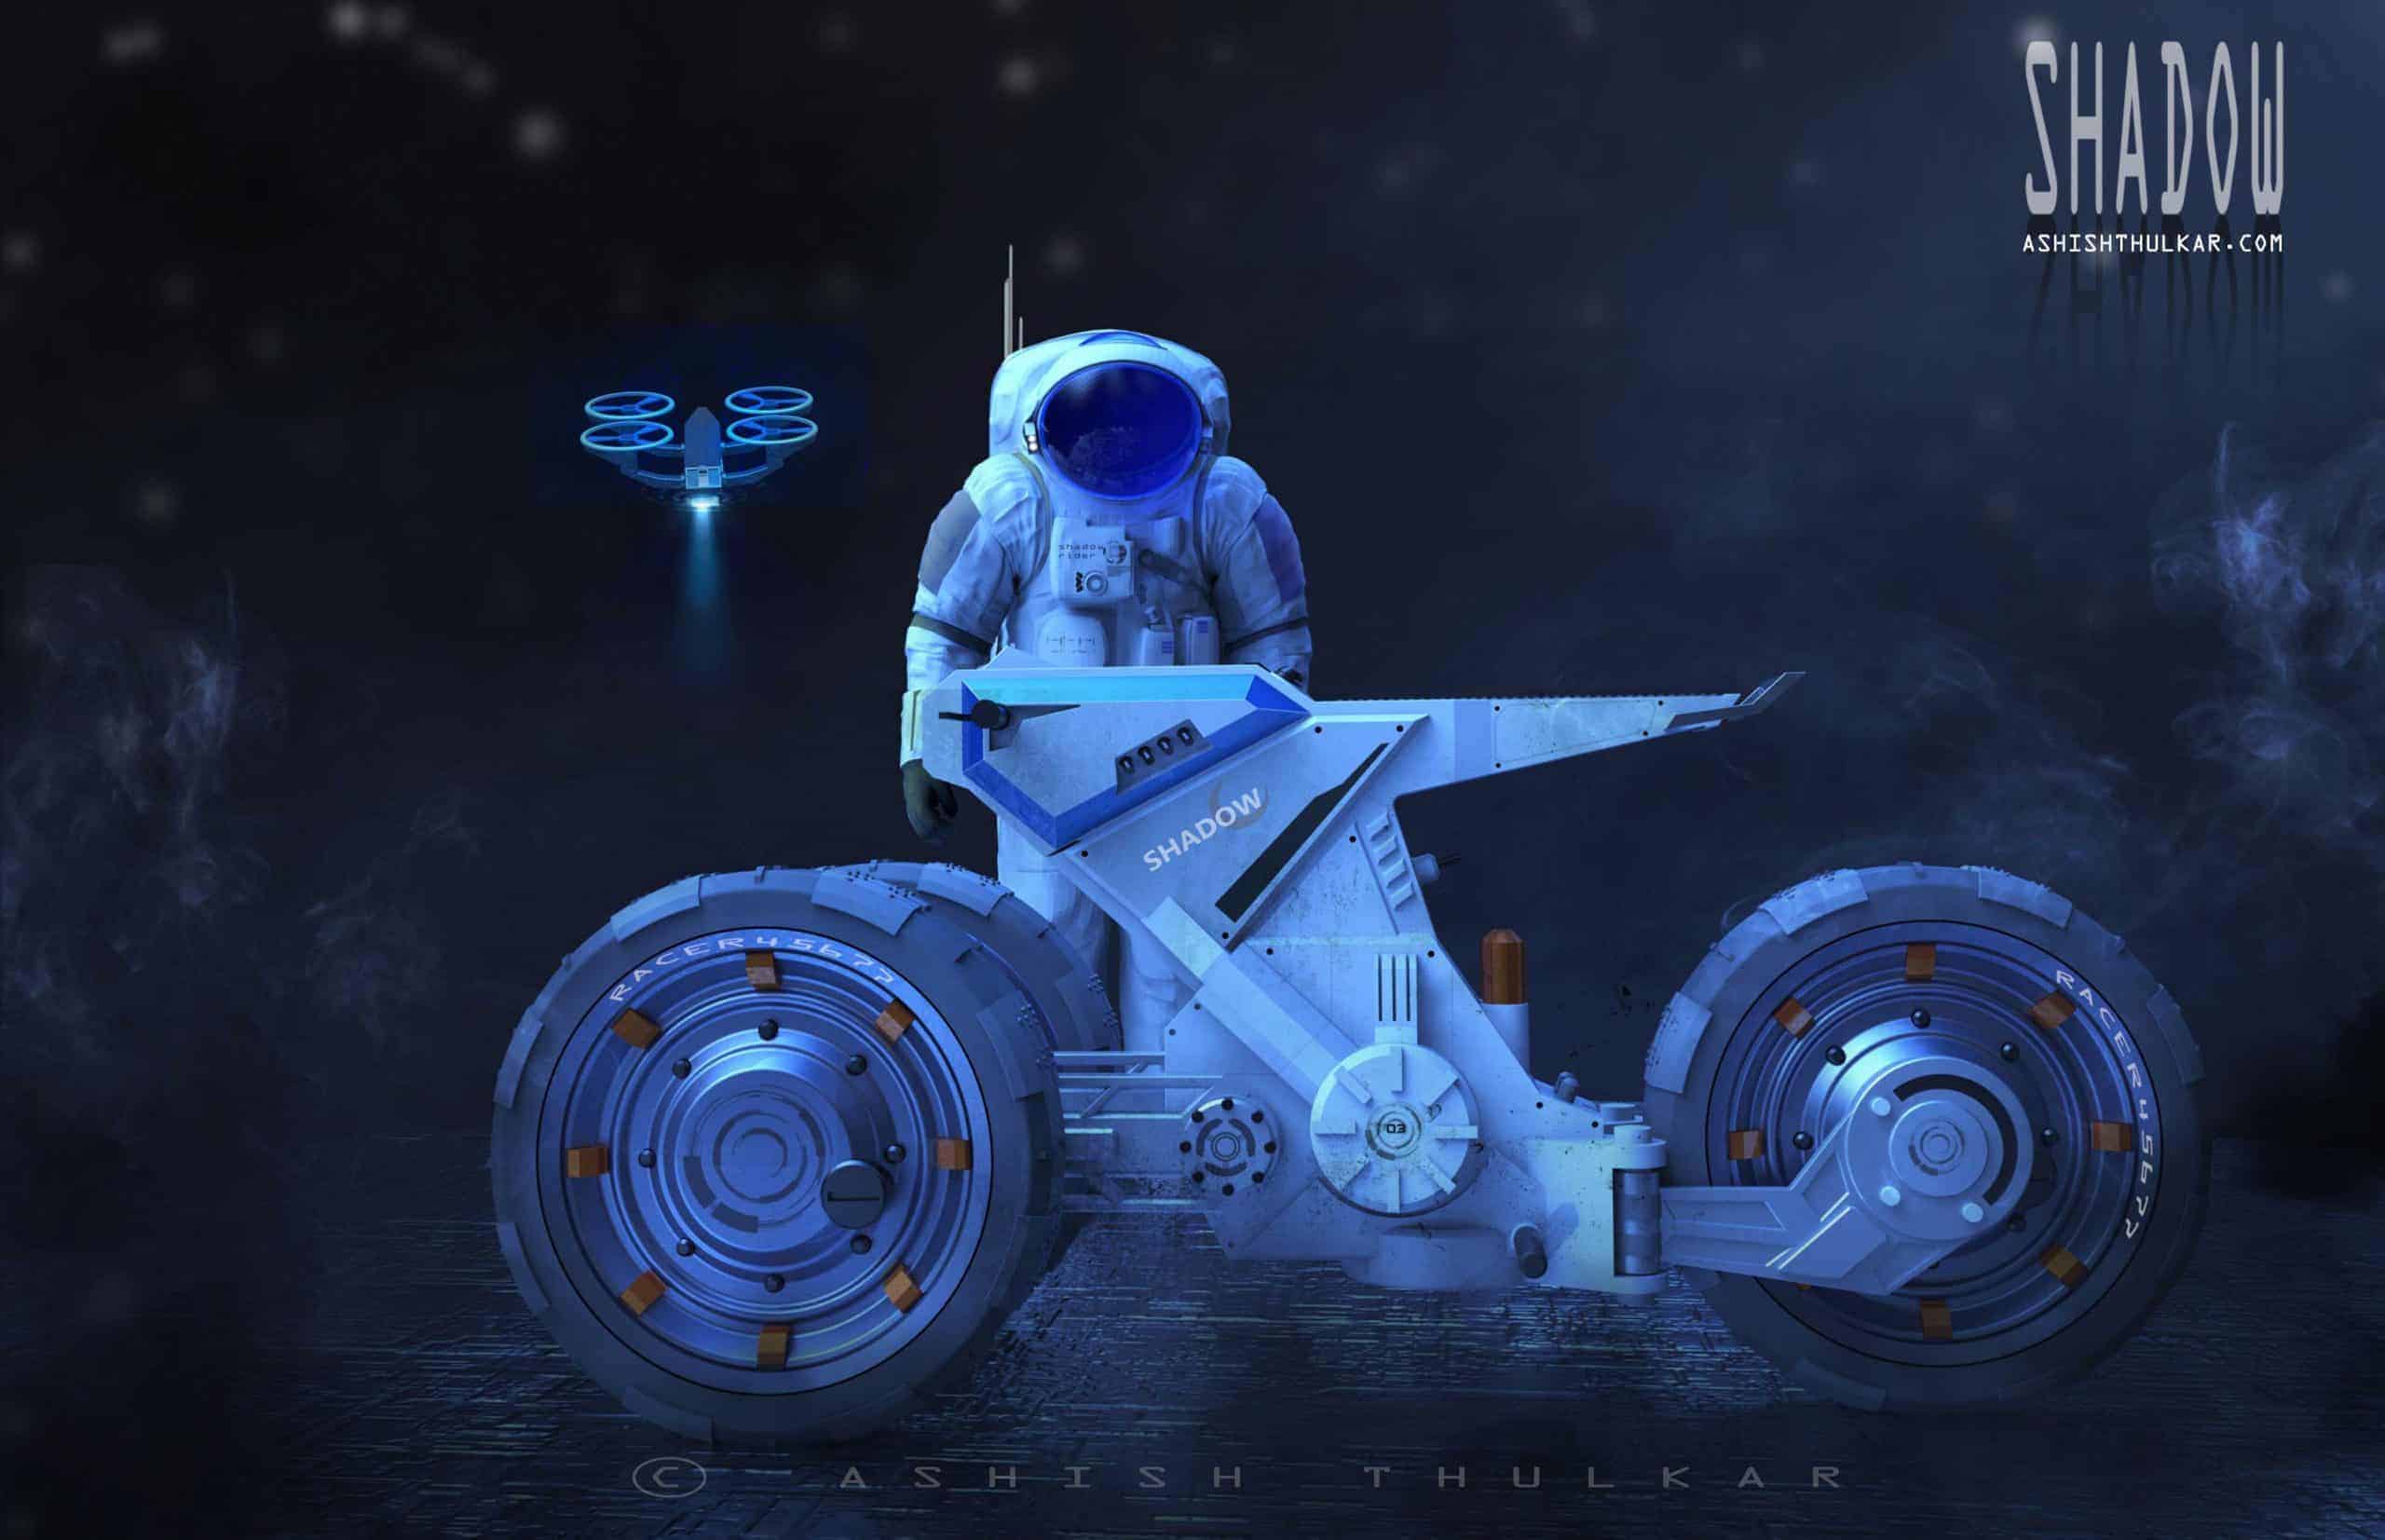 Shadow is a three wheel vehicle concept design for Lunar surface